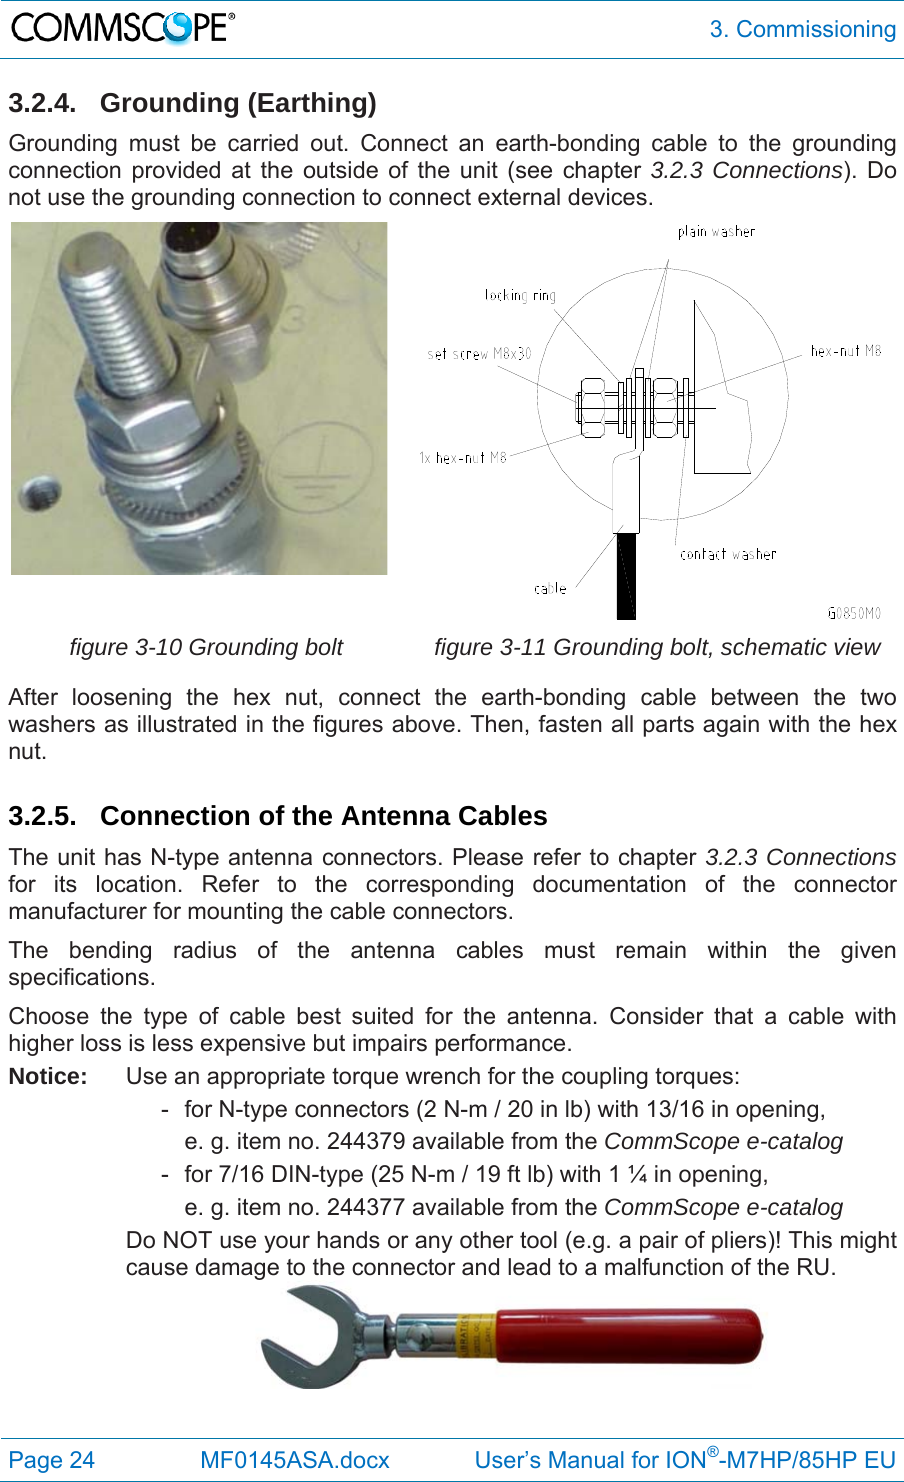  3. Commissioning Page 24  MF0145ASA.docx             User’s Manual for ION®-M7HP/85HP EU 3.2.4. Grounding (Earthing) Grounding must be carried out. Connect an earth-bonding cable to the grounding connection provided at the outside of the unit (see chapter 3.2.3 Connections). Do not use the grounding connection to connect external devices.  figure 3-10 Grounding bolt  figure 3-11 Grounding bolt, schematic view After loosening the hex nut, connect the earth-bonding cable between the two washers as illustrated in the figures above. Then, fasten all parts again with the hex nut.  3.2.5.  Connection of the Antenna Cables The unit has N-type antenna connectors. Please refer to chapter 3.2.3 Connections for its location. Refer to the corresponding documentation of the connector manufacturer for mounting the cable connectors.  The bending radius of the antenna cables must remain within the given specifications.  Choose the type of cable best suited for the antenna. Consider that a cable with higher loss is less expensive but impairs performance. Notice:  Use an appropriate torque wrench for the coupling torques:     -  for N-type connectors (2 N-m / 20 in lb) with 13/16 in opening,        e. g. item no. 244379 available from the CommScope e-catalog     -  for 7/16 DIN-type (25 N-m / 19 ft lb) with 1 ¼ in opening,        e. g. item no. 244377 available from the CommScope e-catalog Do NOT use your hands or any other tool (e.g. a pair of pliers)! This might cause damage to the connector and lead to a malfunction of the RU.    